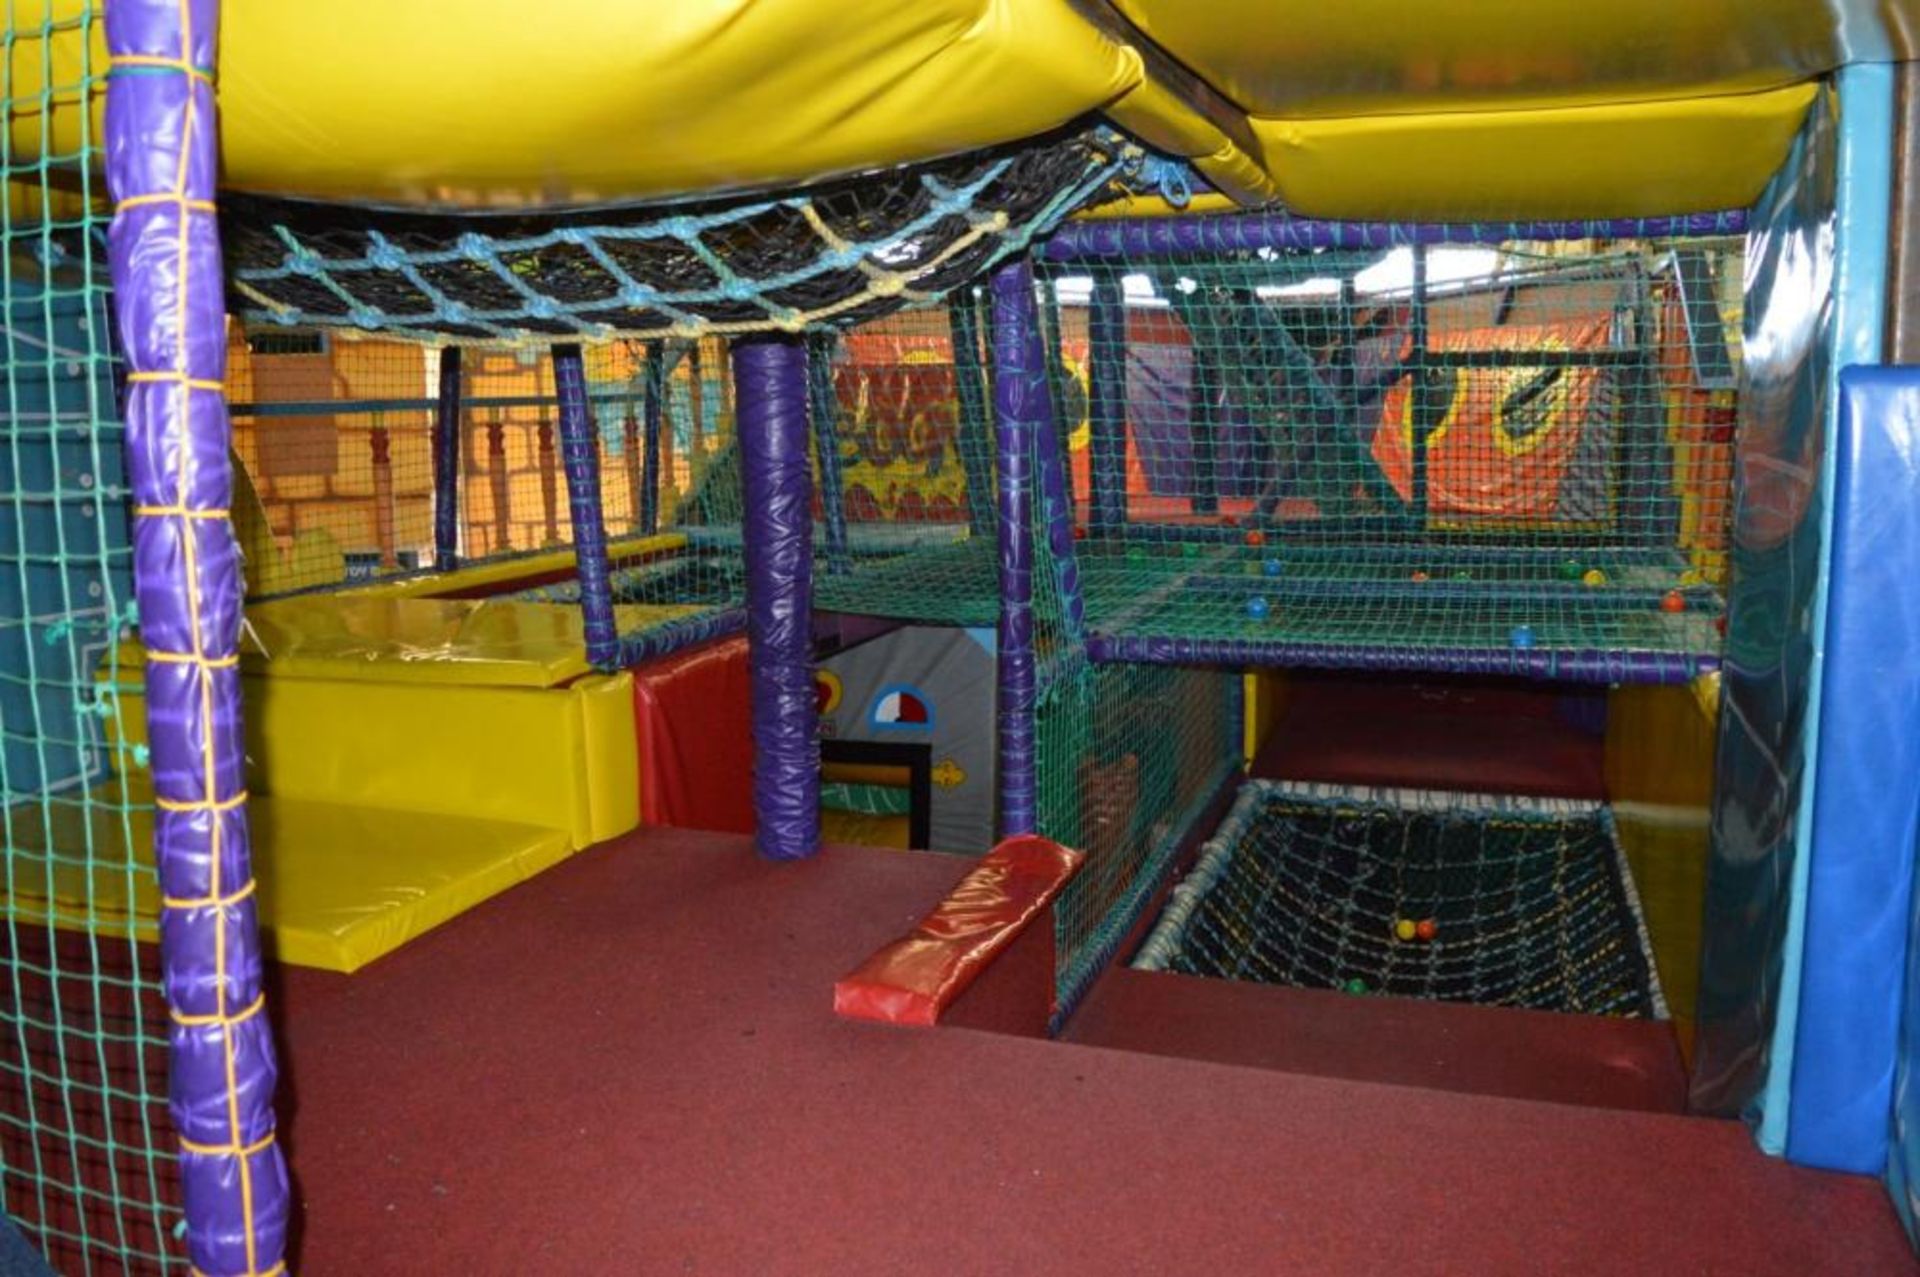 1 x Large Amount of Playcentre Safety Padding and Netting - Includes Lots of Various Designs and - Image 3 of 25